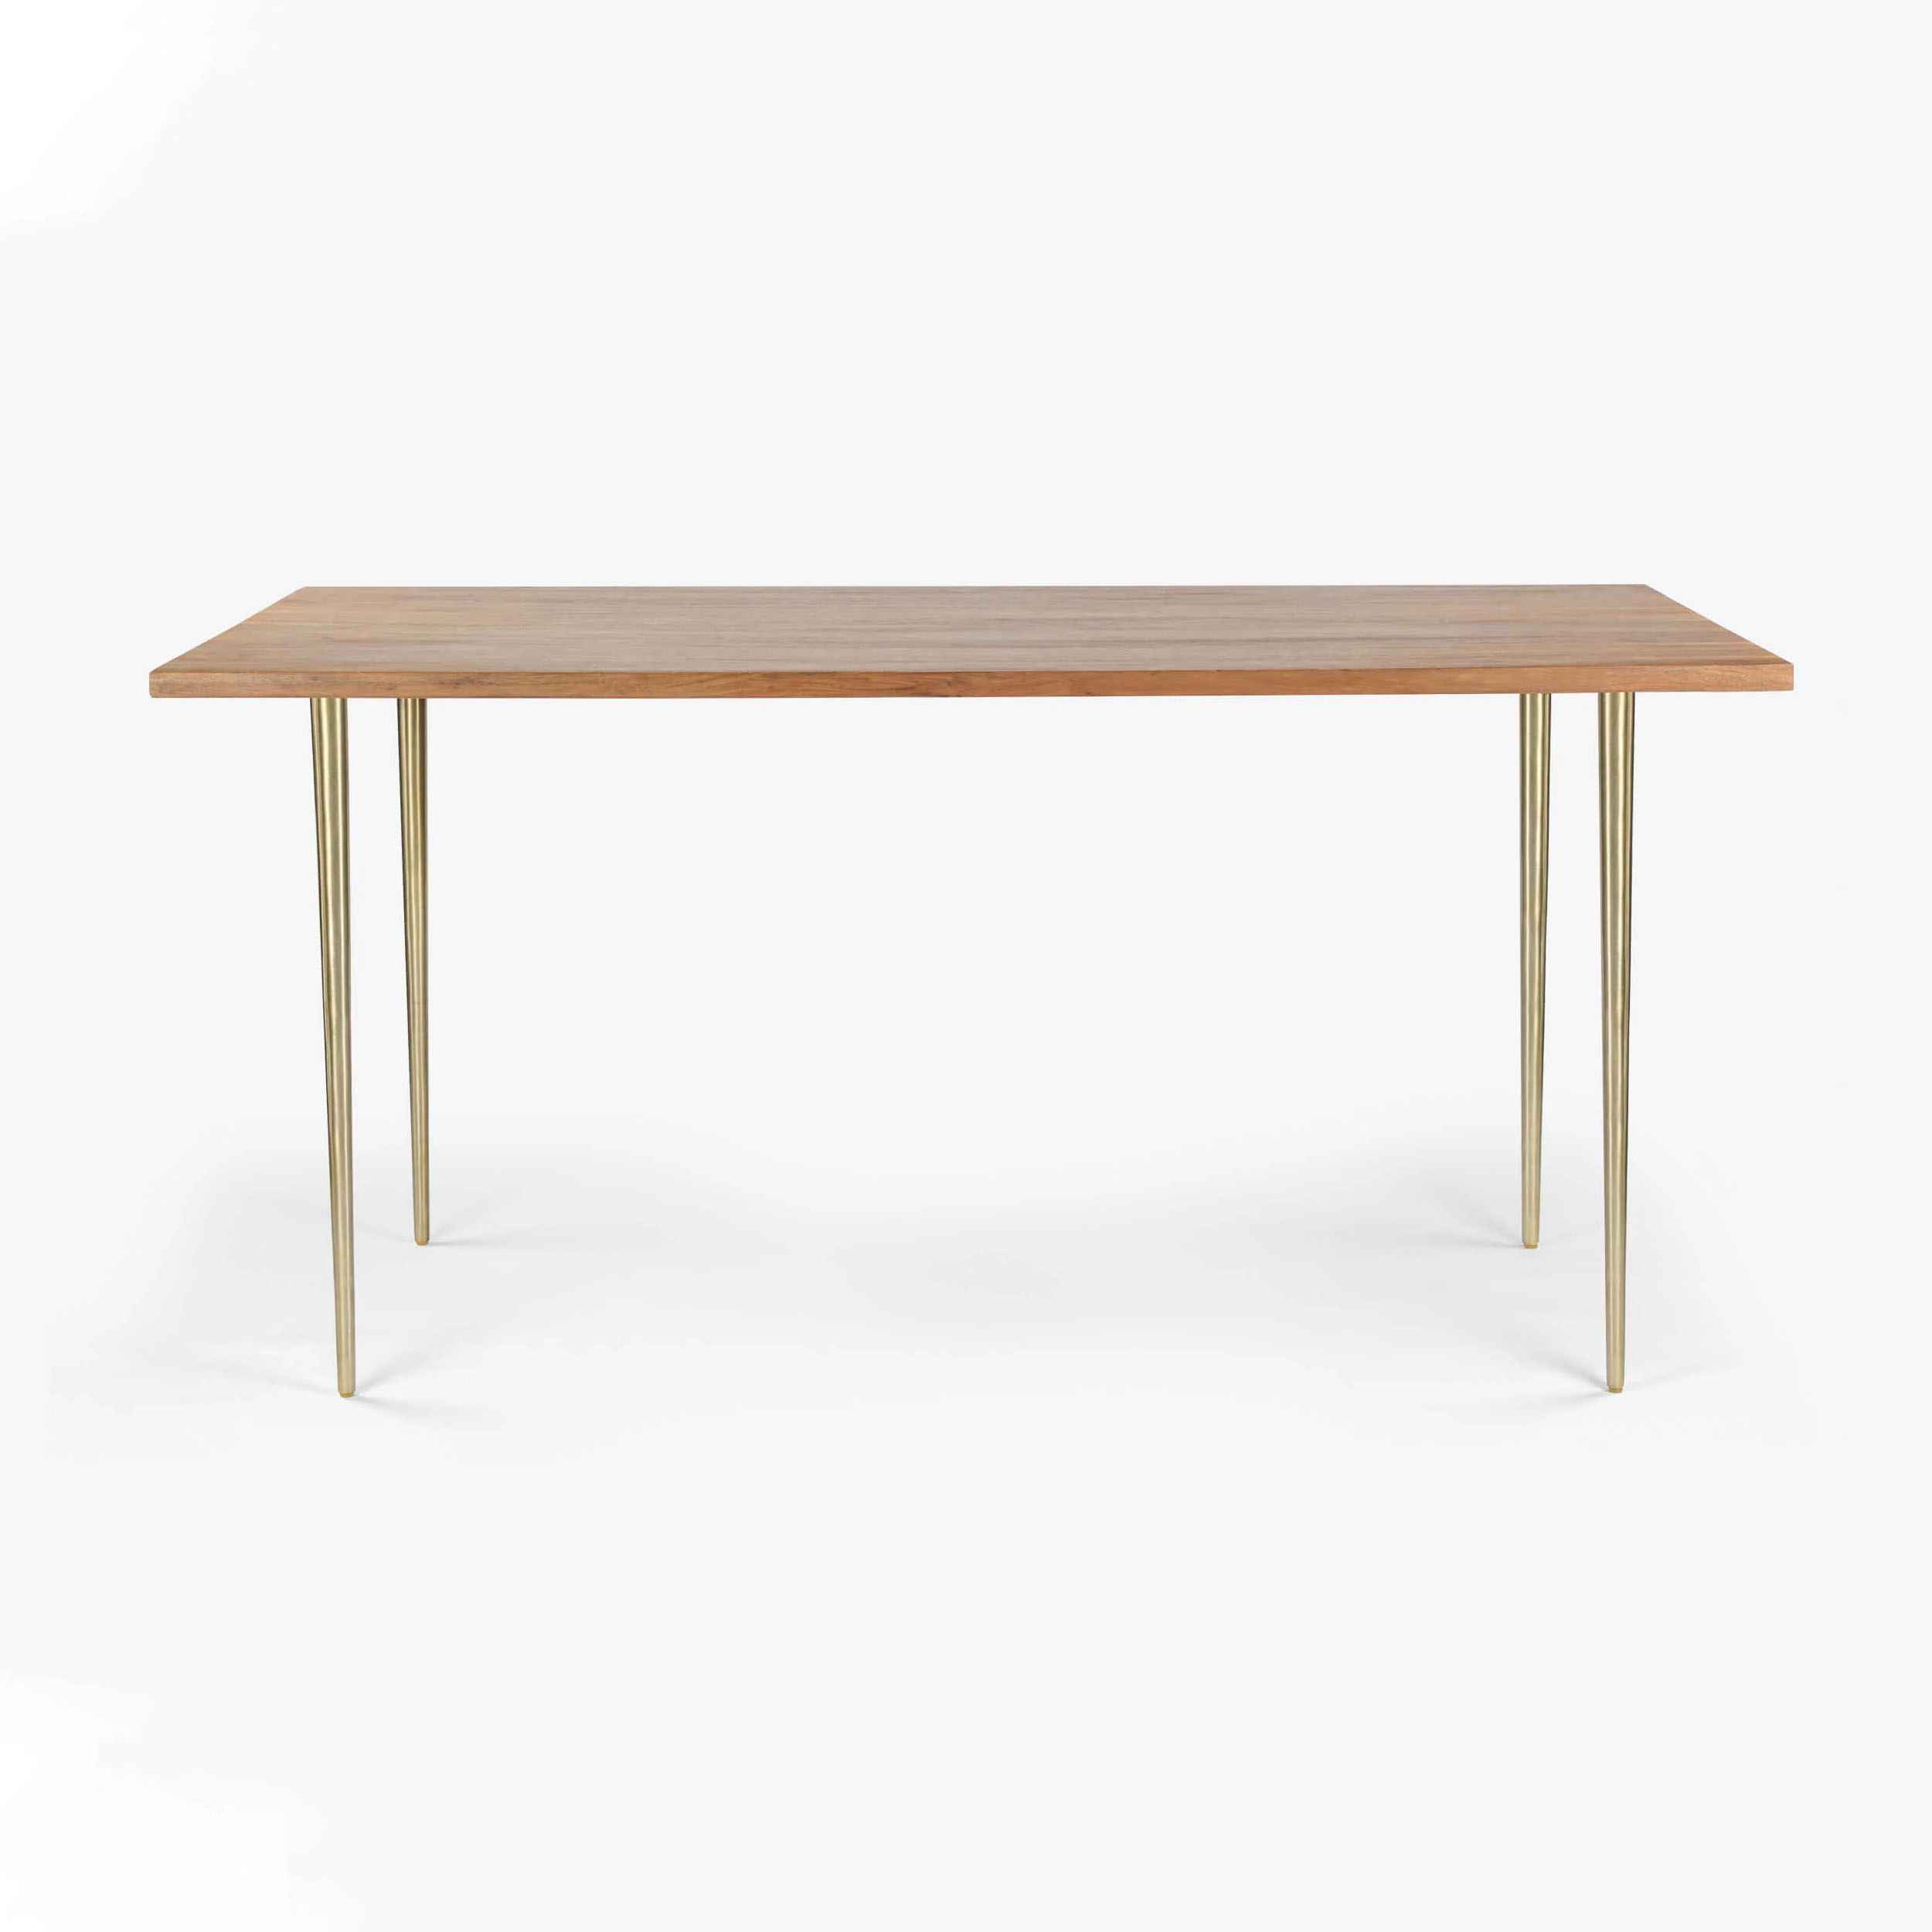 Yoho Dining Table 4 Seater